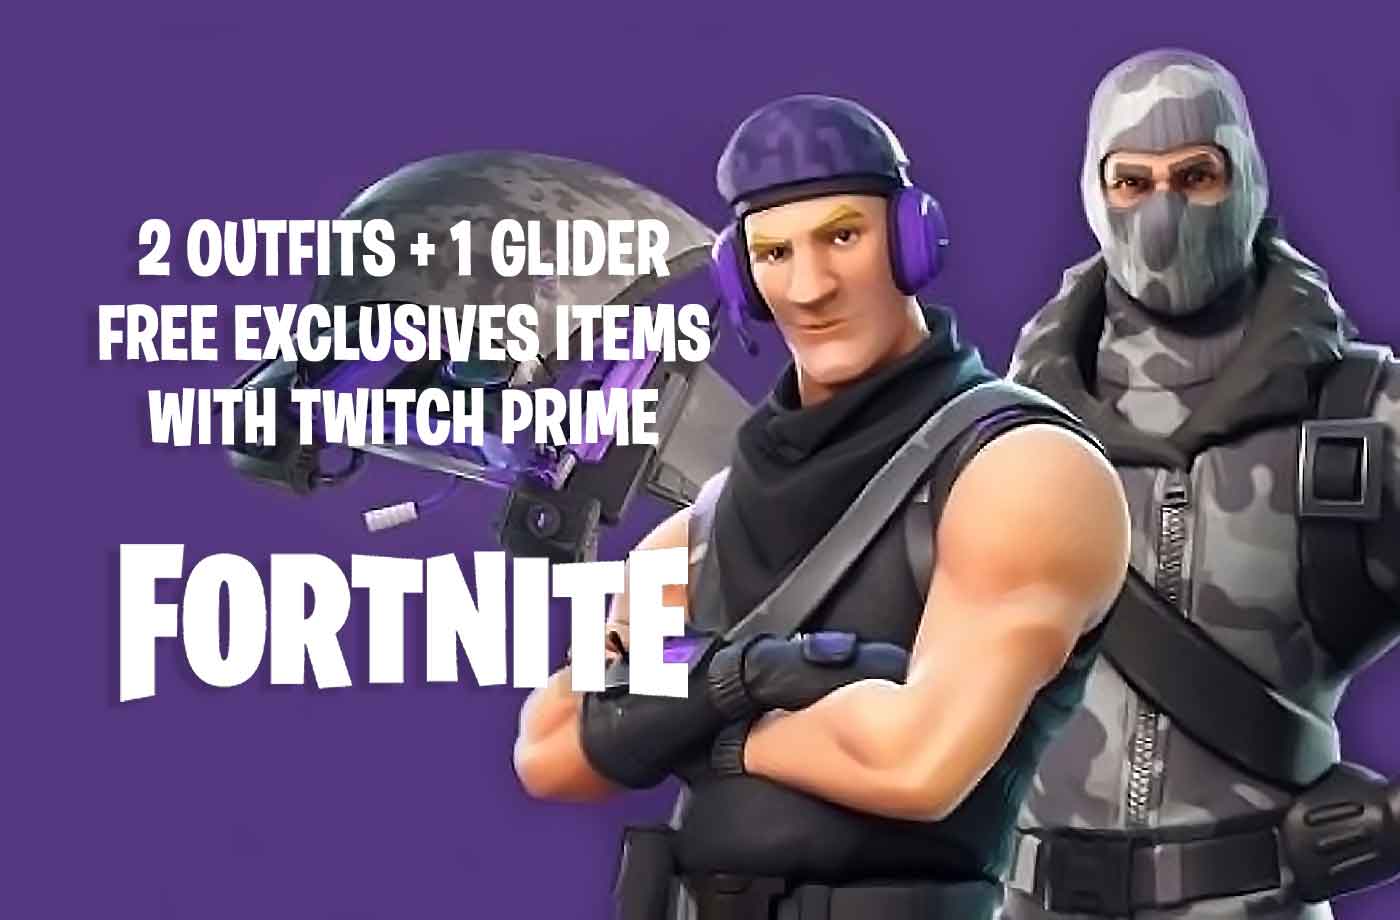 Fortnite Twitch Prime Guide How to Get the New Free Skins ... - 1400 x 920 jpeg 63kB